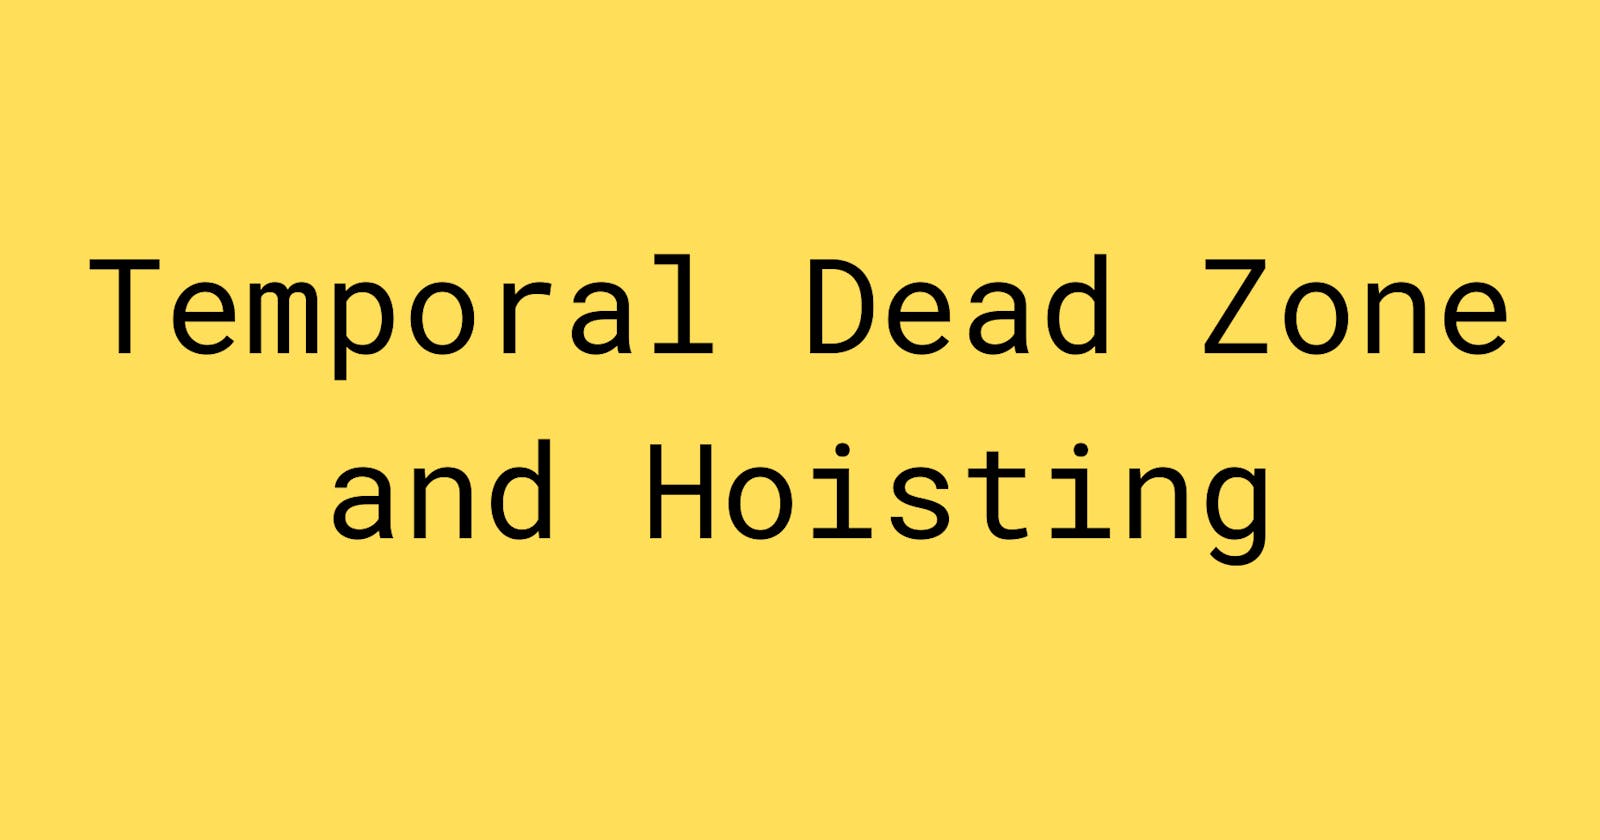 Hoisting And Temporal Dead Zone